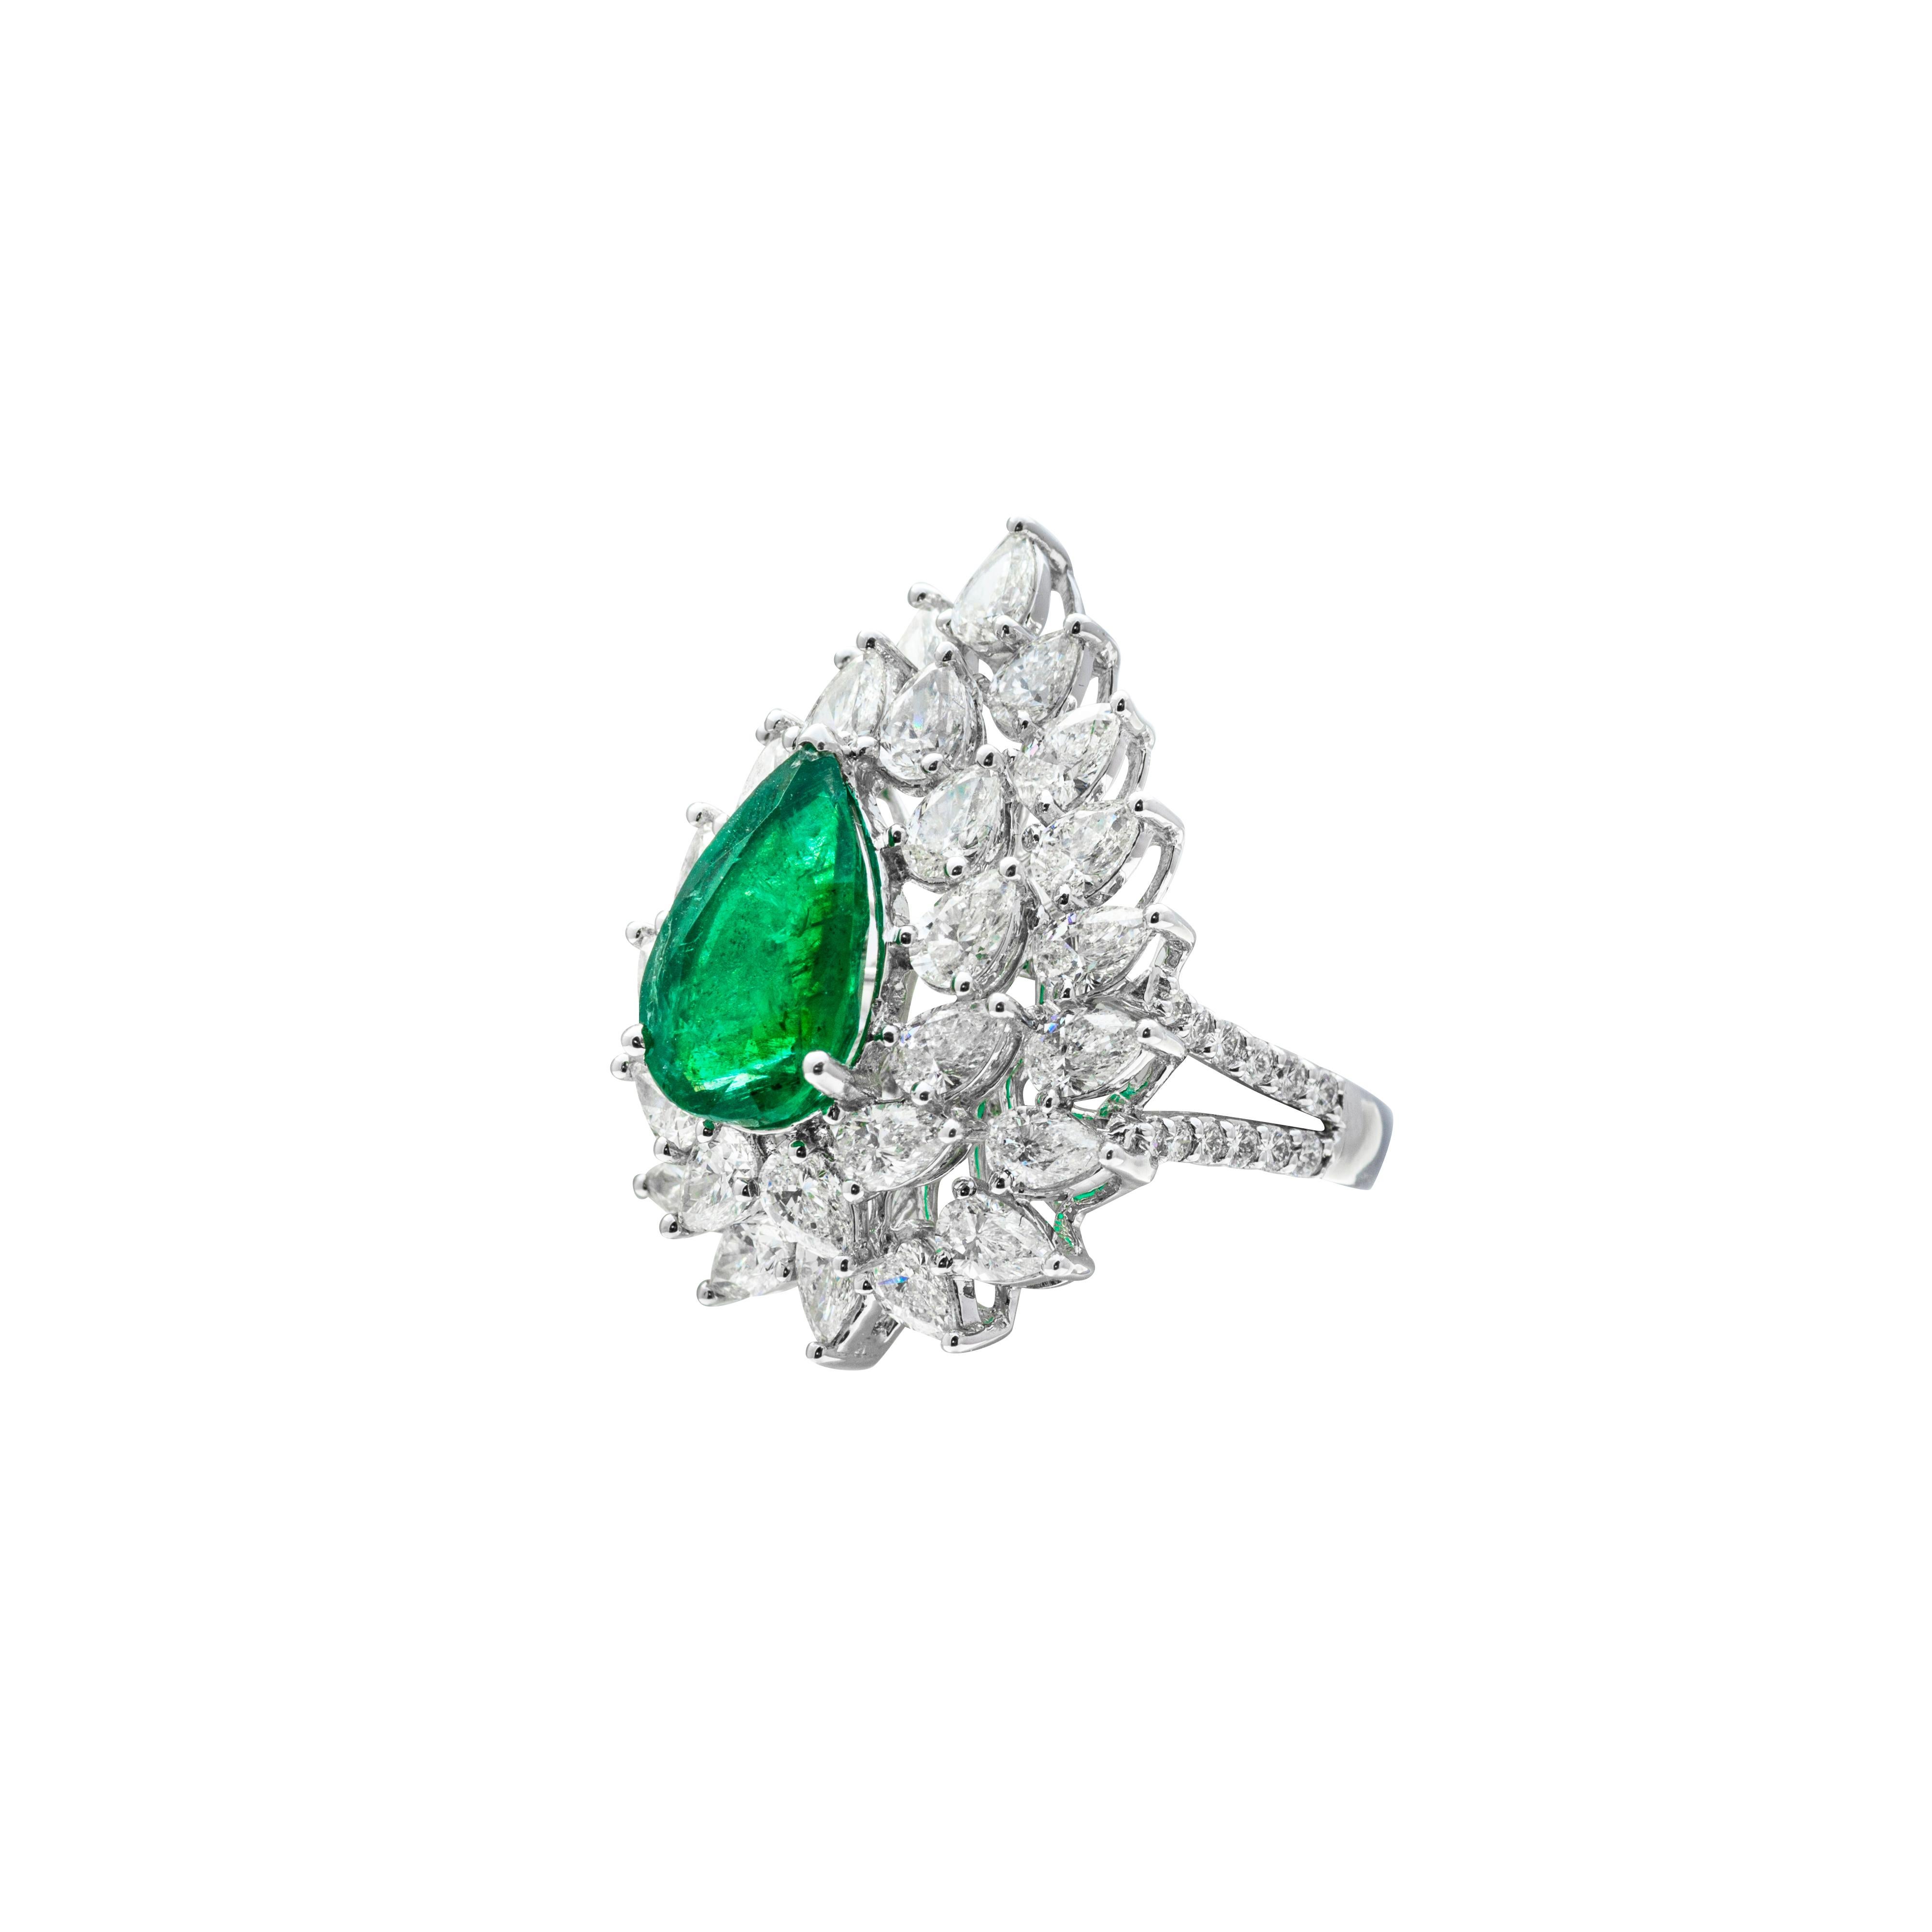 18 Karat White Gold Emerald And Diamond Cocktail Ring

Beautifully crafted cocktail ring set in 18 Karat white gold studded with a stunning zambian emerald and brilliant cut diamonds. This is ideal for evening wear.

US Size - 5
Emerald -